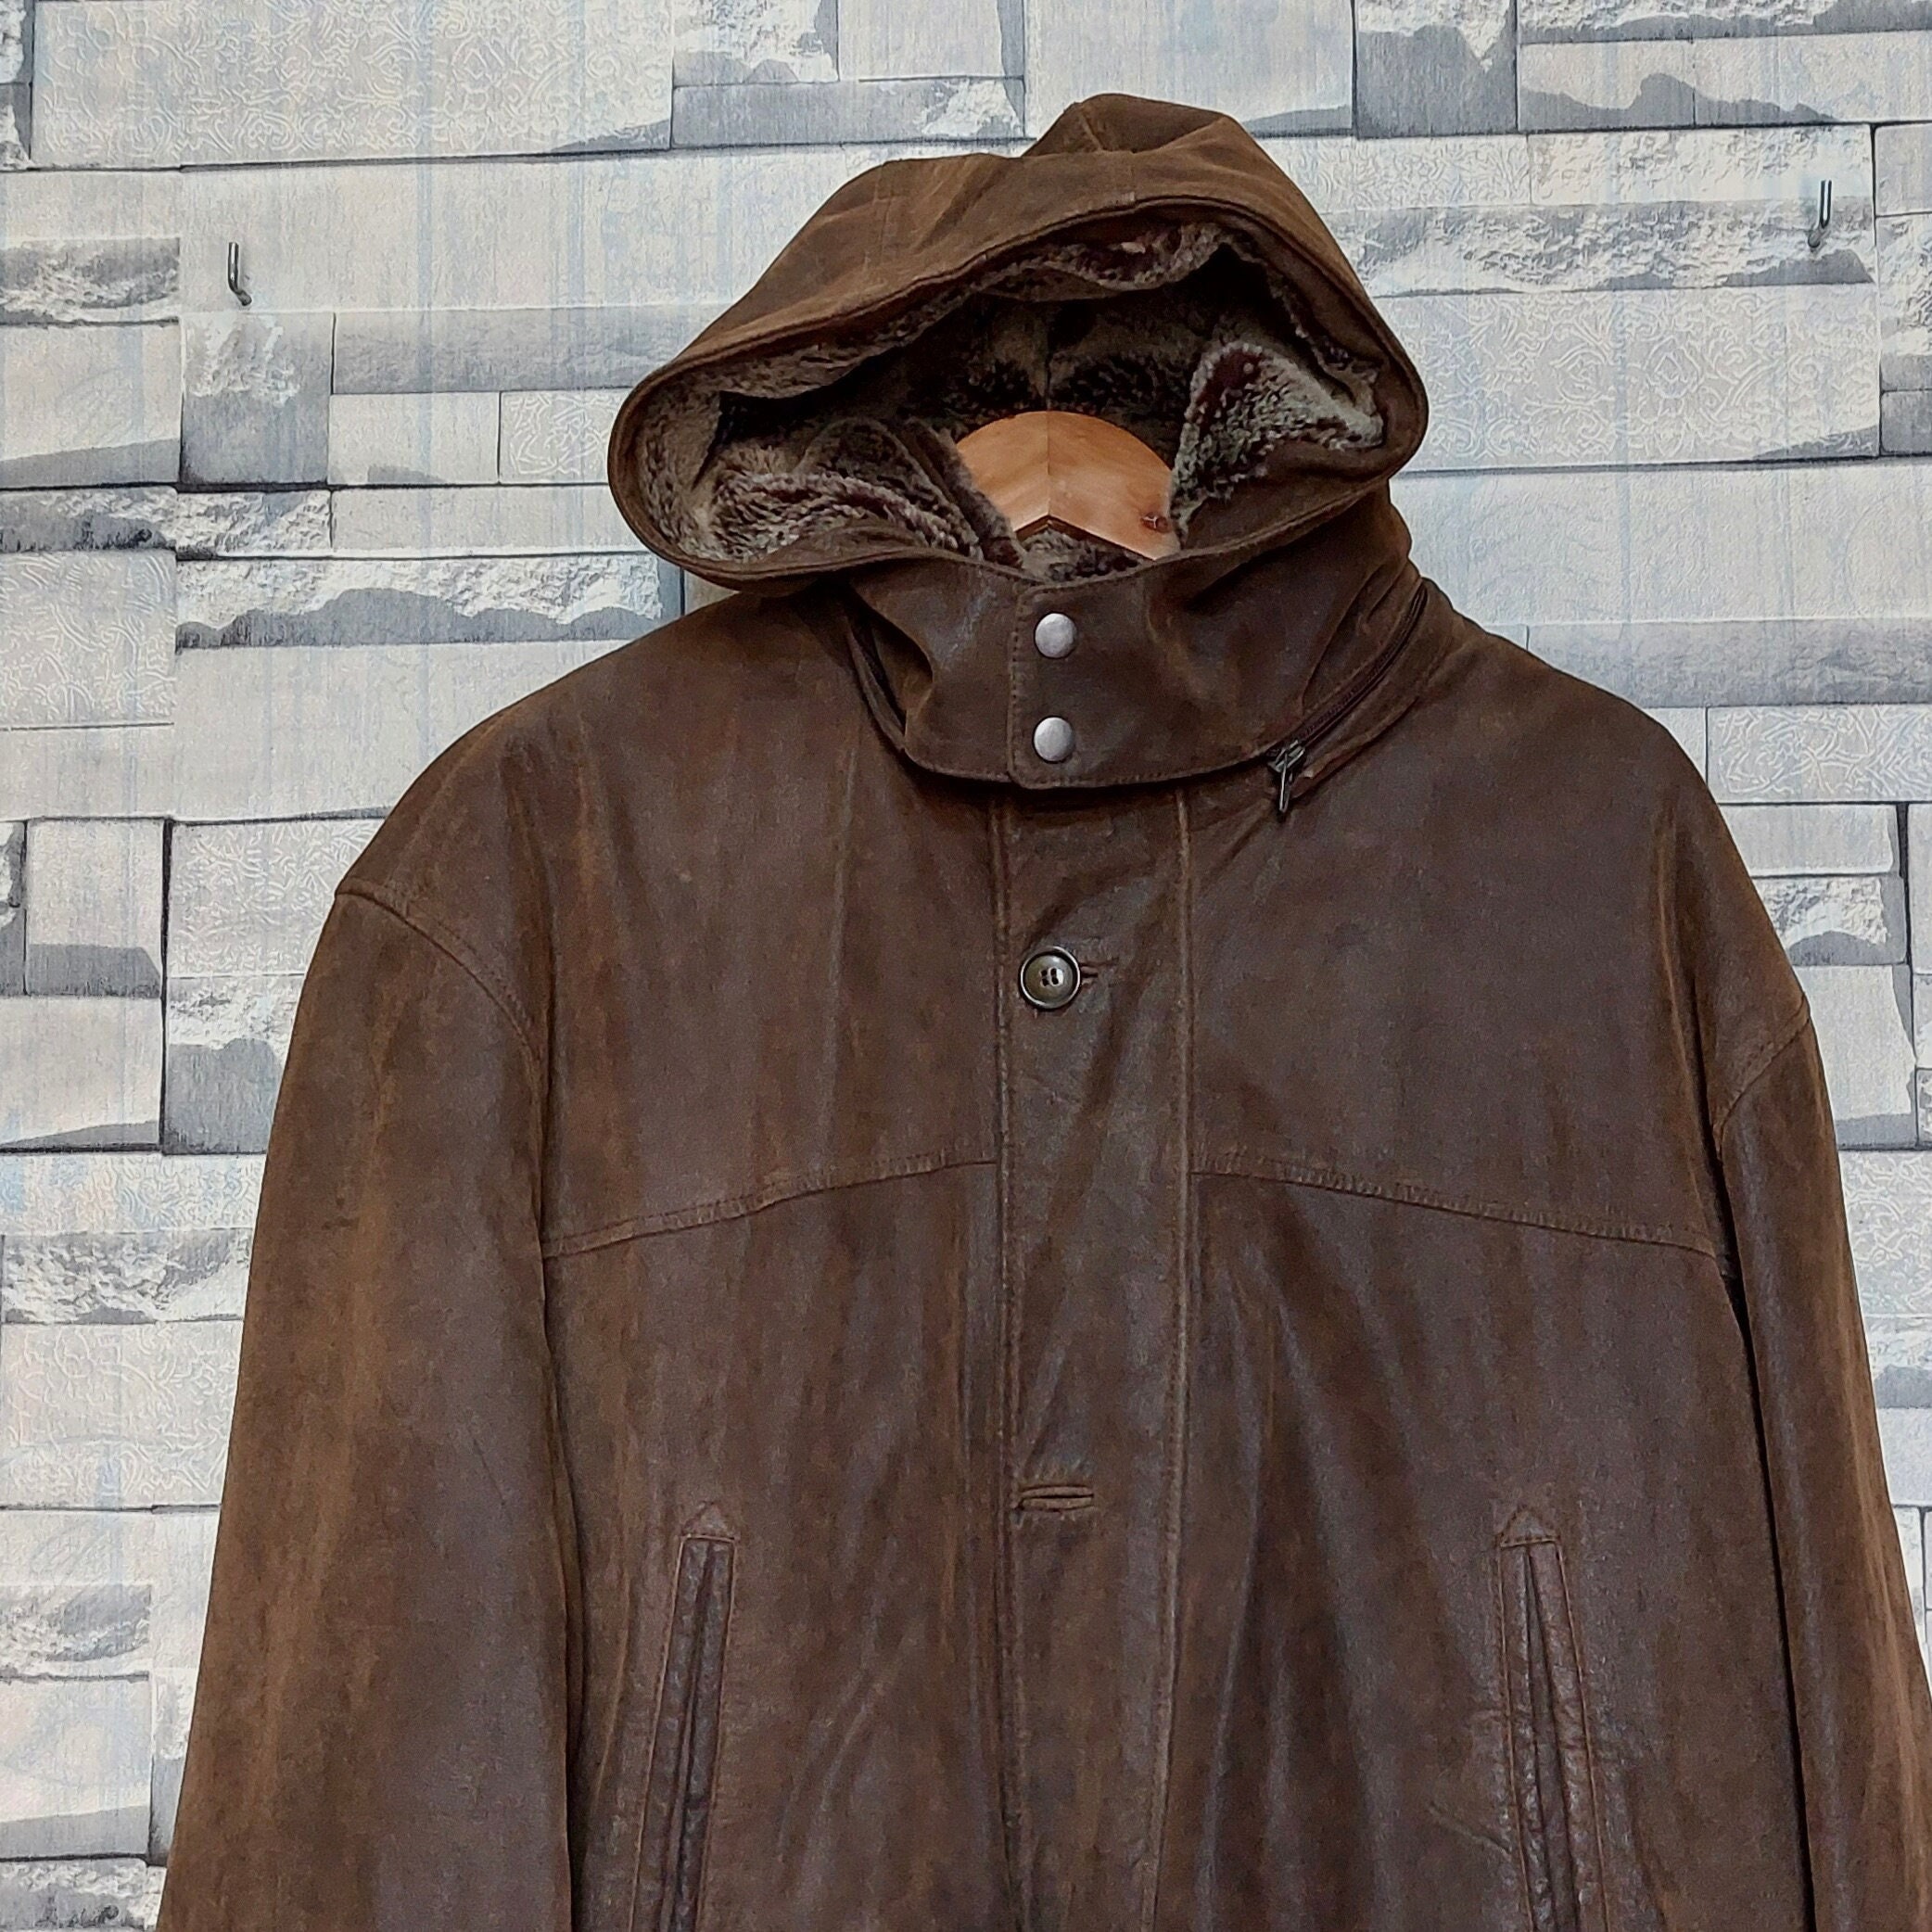 Men Leather Abercrombie - 56/2X/ Leather Leather 90s Brown & Wax Hoodie Jacket/ Fitch Vintage Retro Clothing Denmark Etsy Jacket/ Antique Jacket VTG Size: